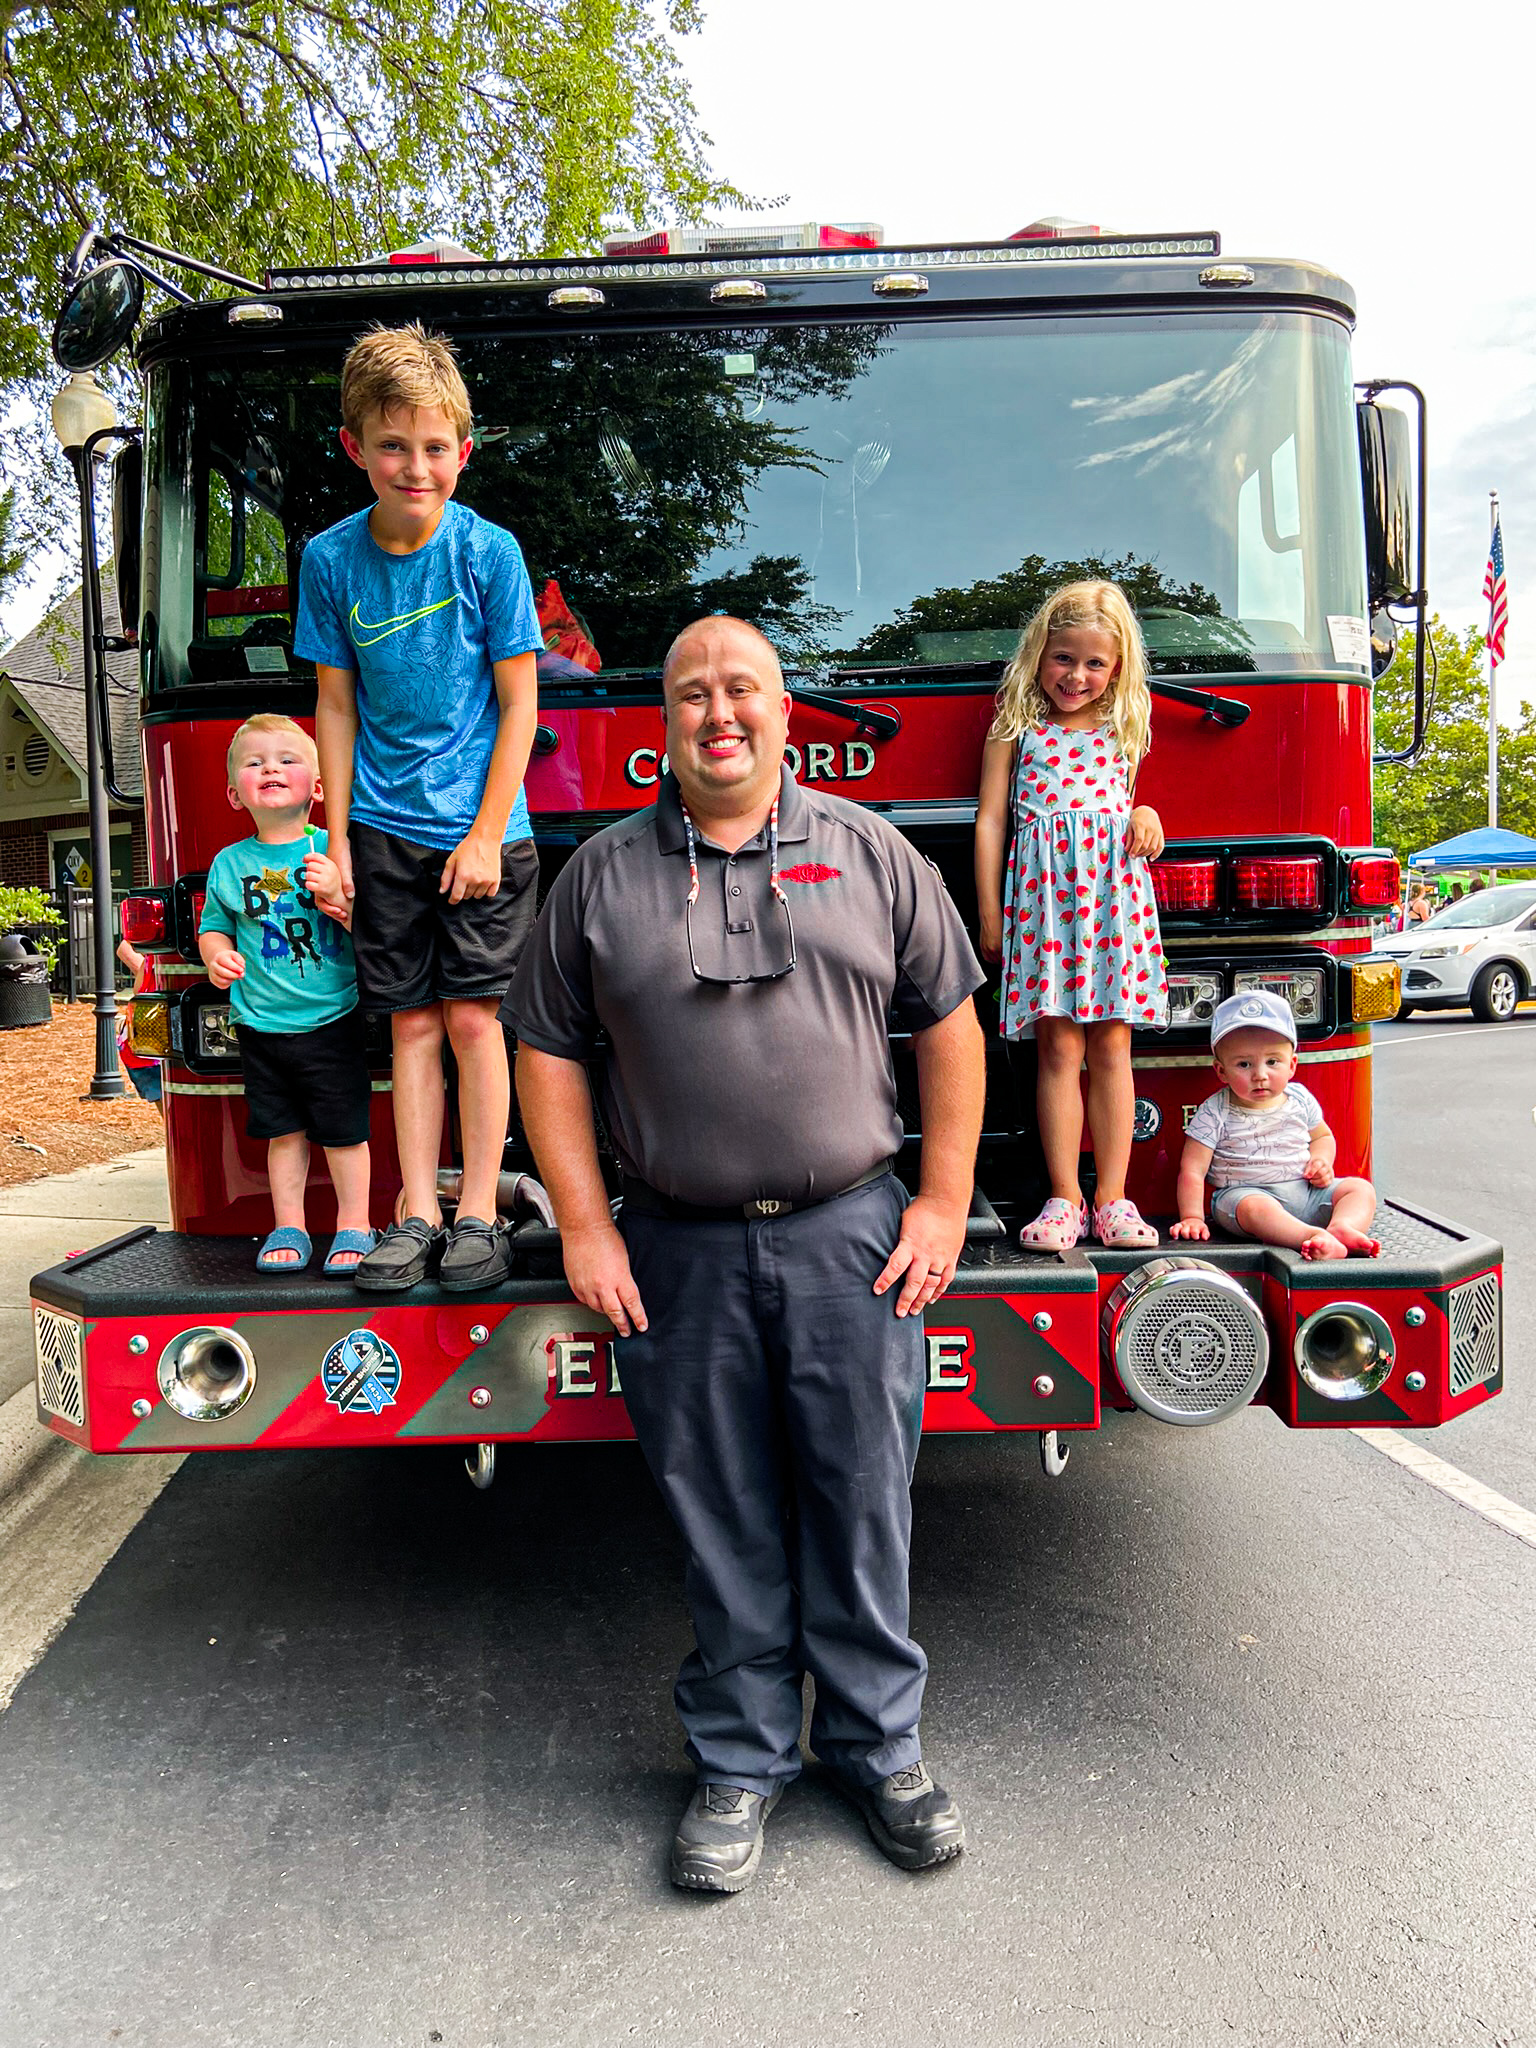 Concord Fire Truck, Firefighter, and Kids